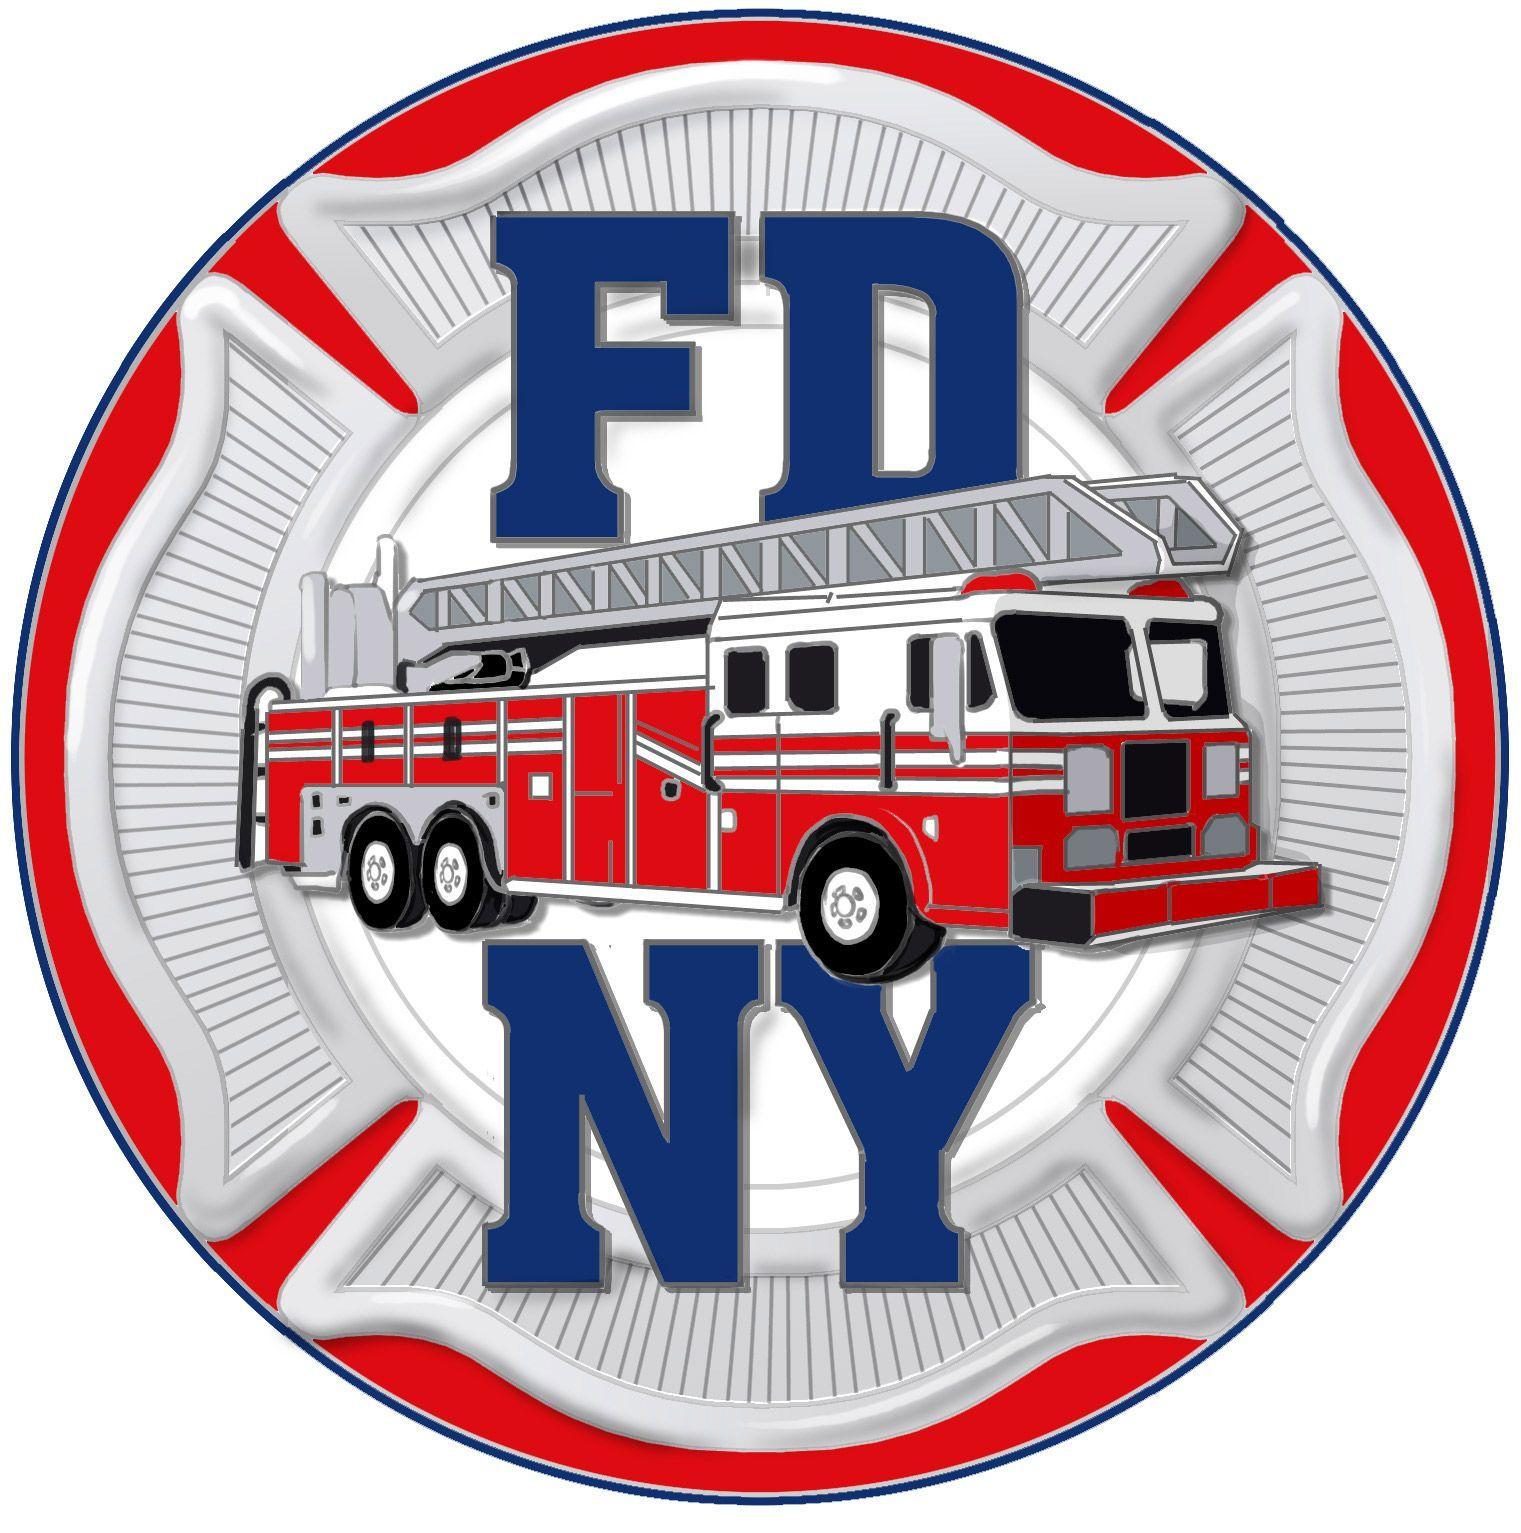 FDNY Logo - FDNY Logo. Approximately350 transcripts were issued in 2012. Most